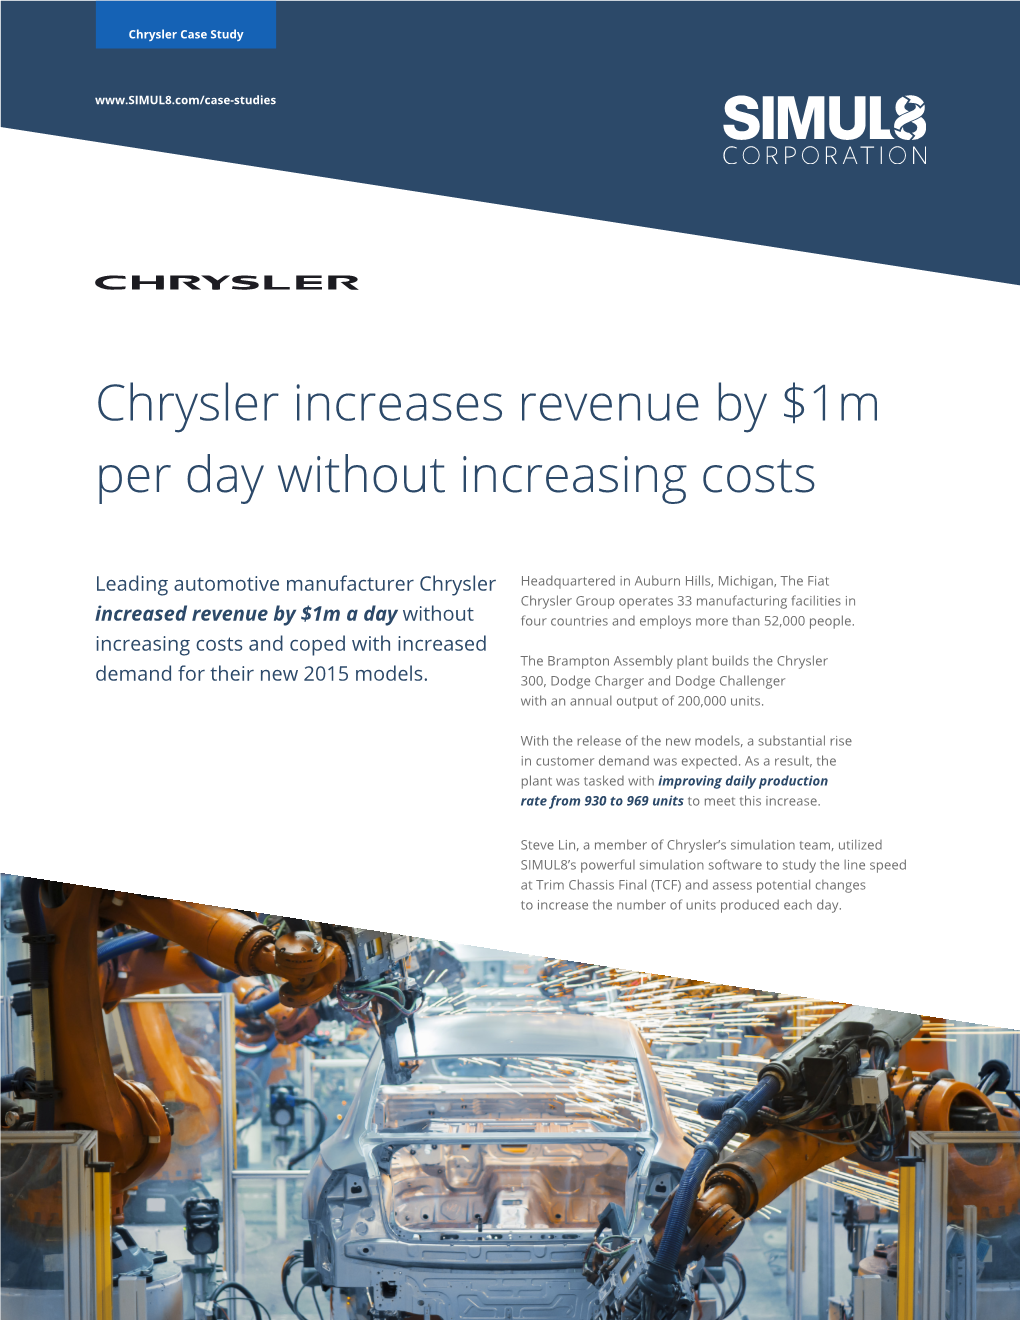 Chrysler Increases Revenue by $1M Per Day Without Increasing Costs